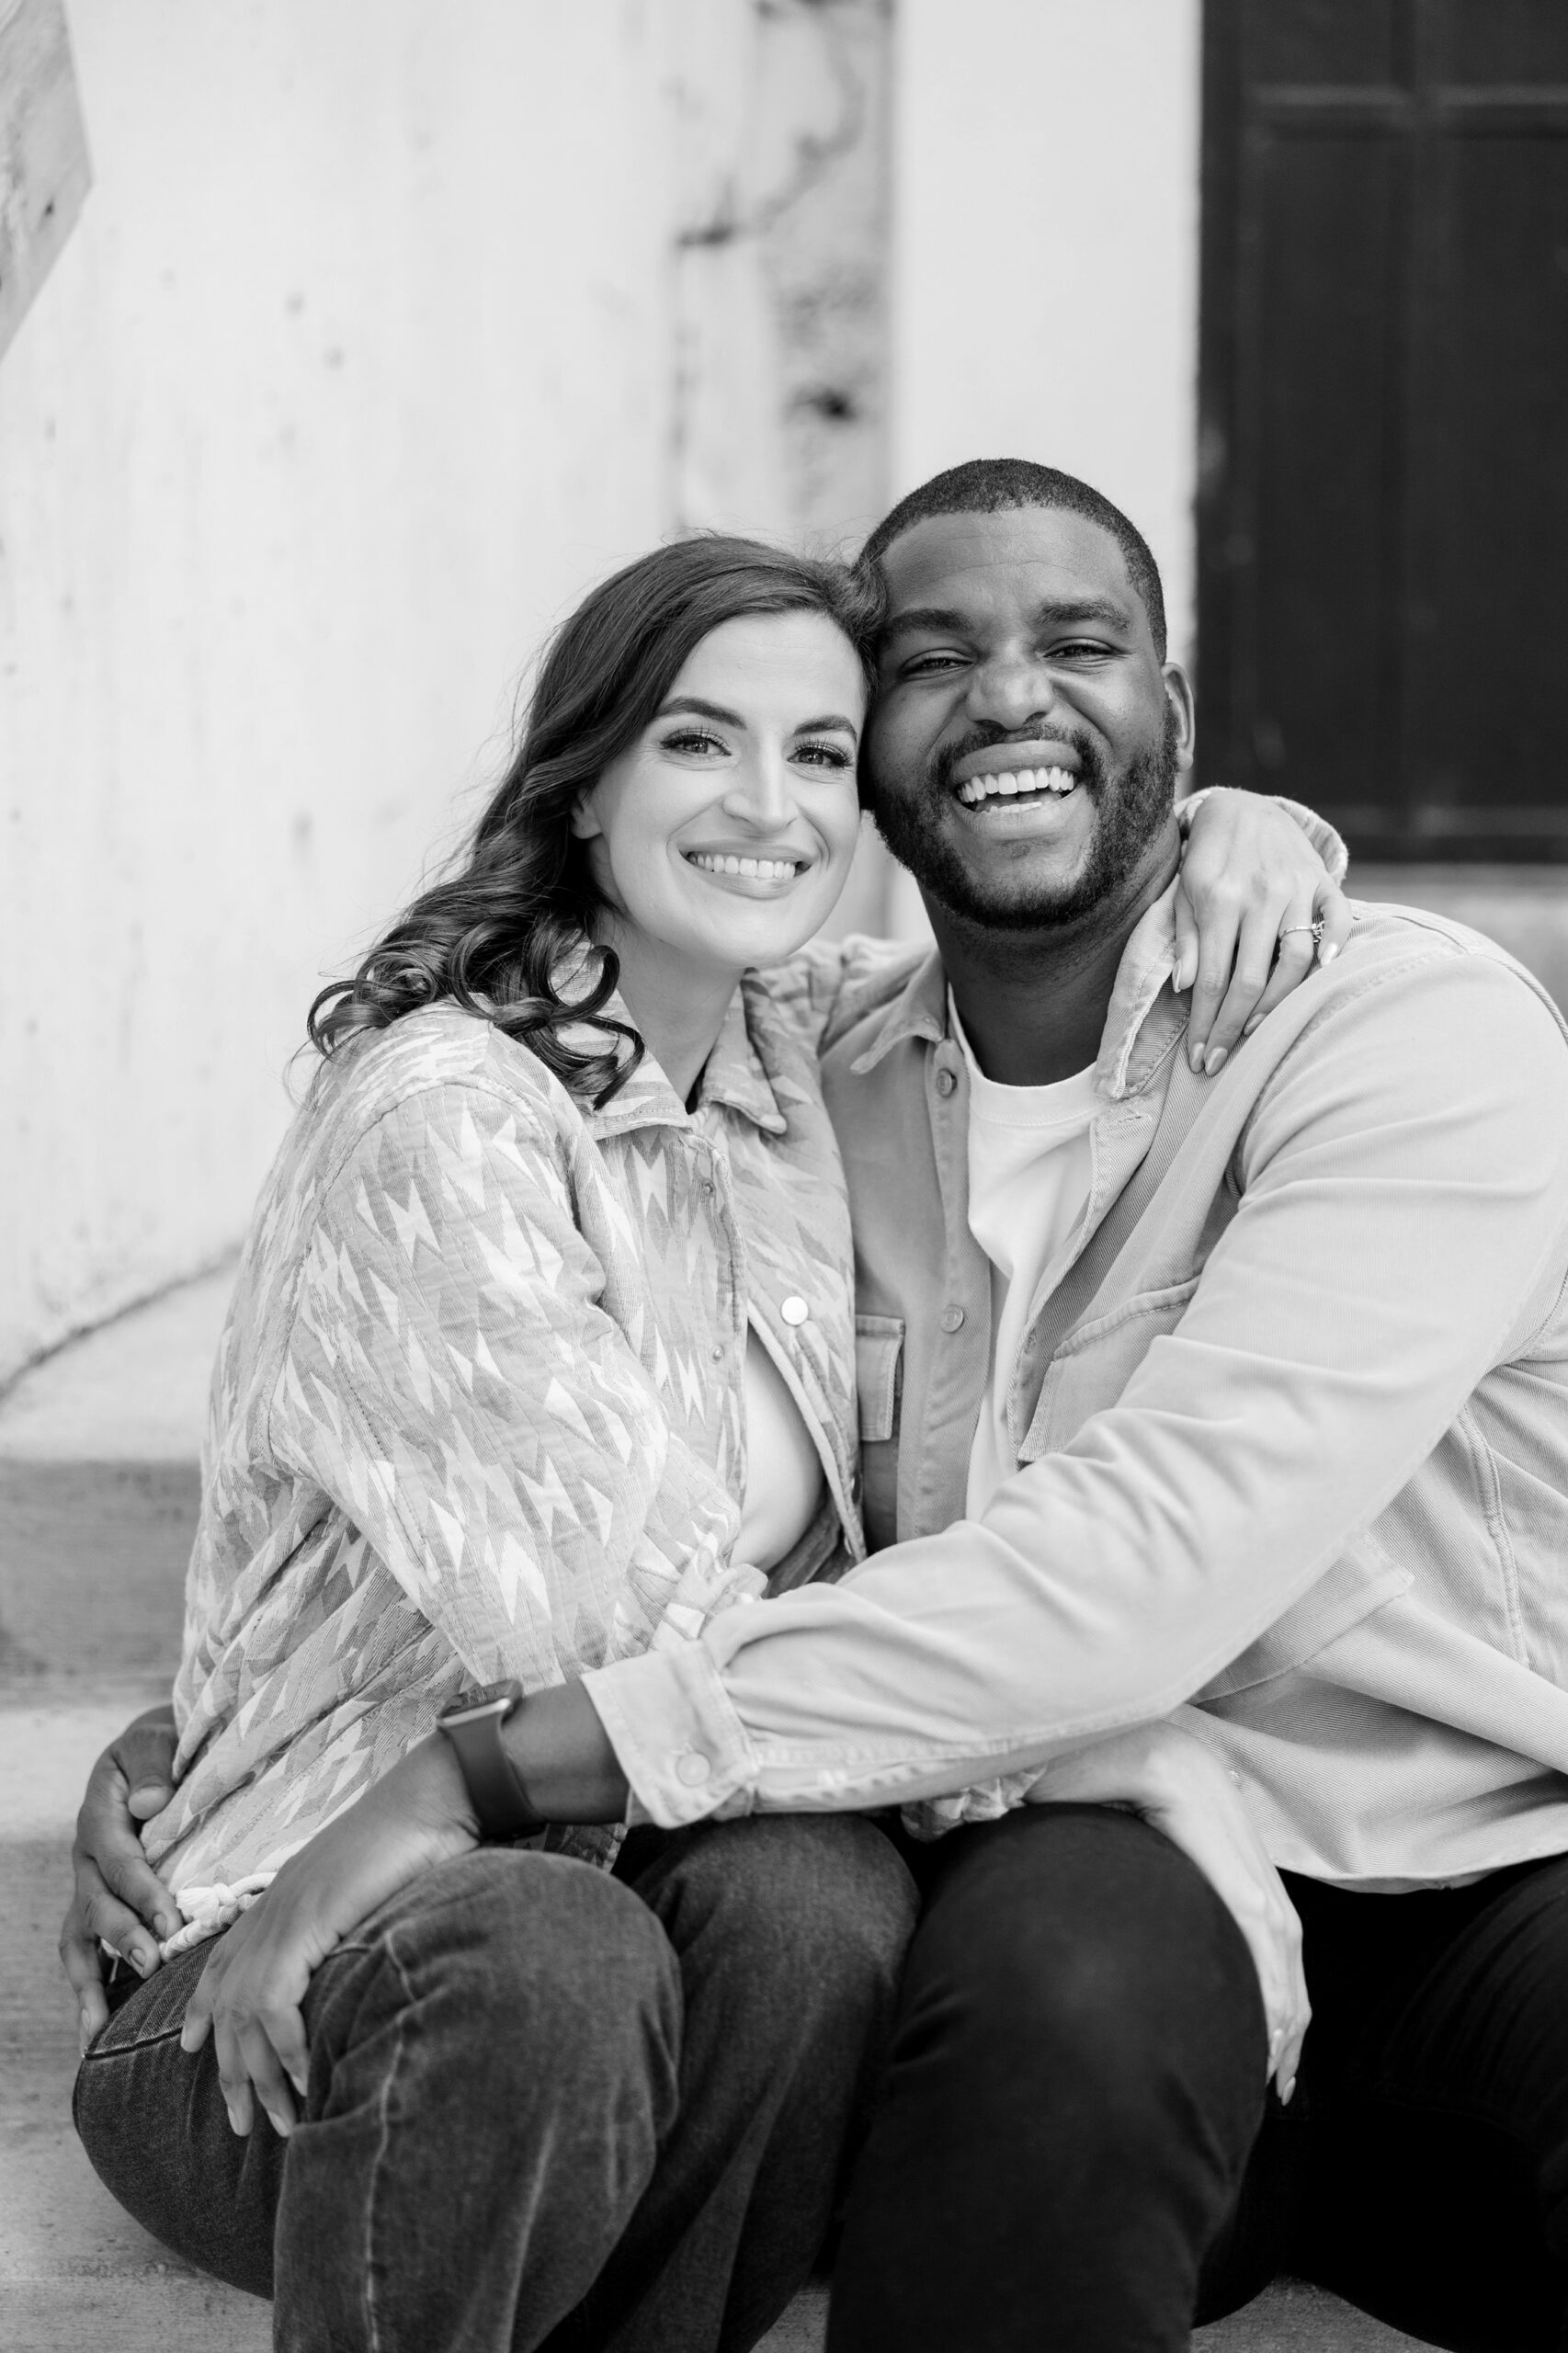 Man and woman smile at the camera during Chicago engagement photos